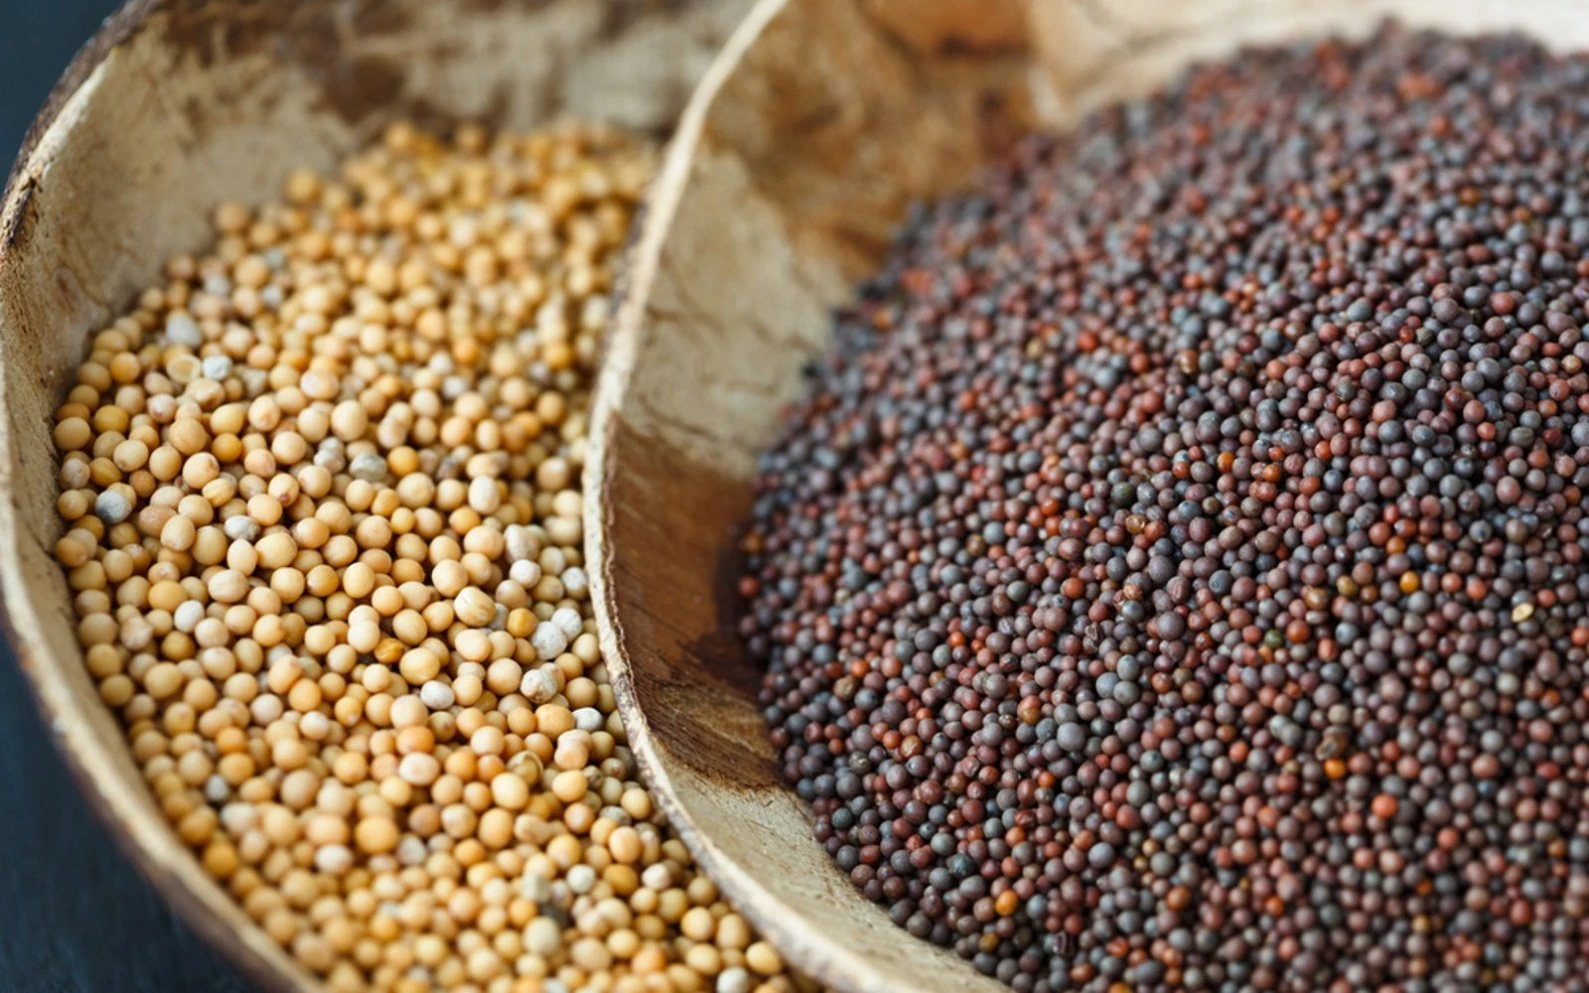 What To Do With Mustard Seeds